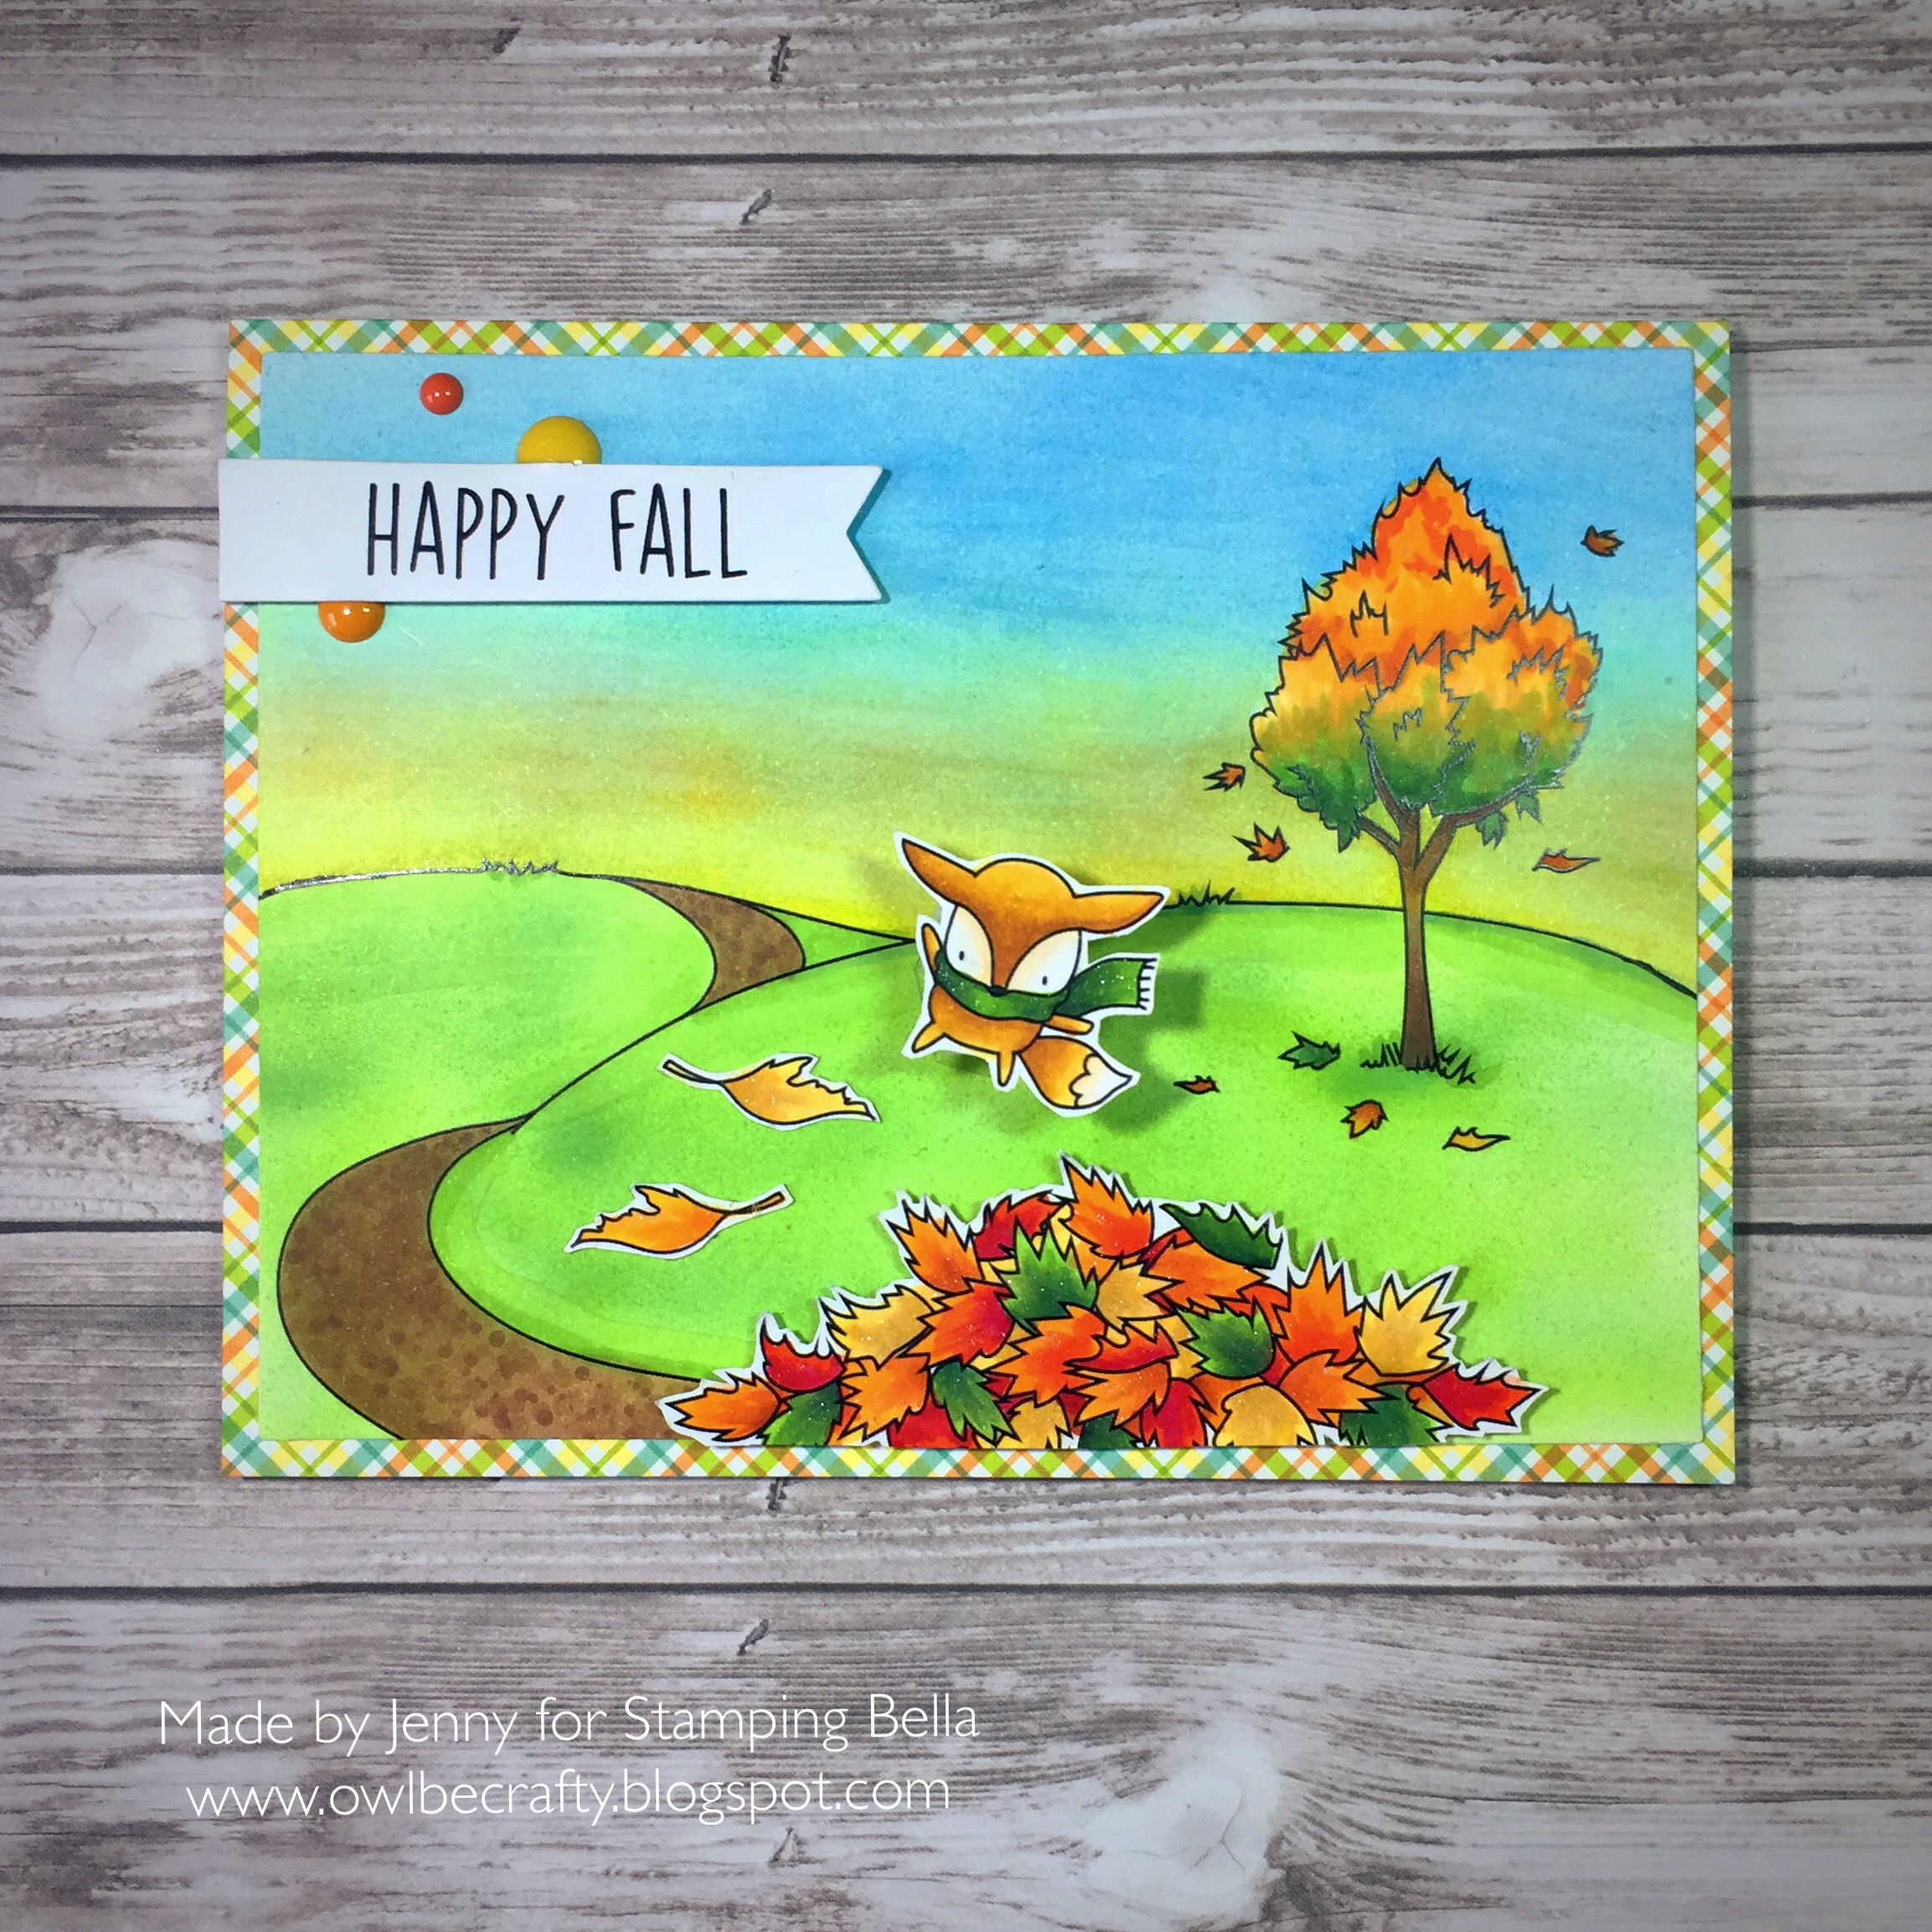 Stamping Bella SNEAK PEEK DAY 1- STAMPS USED: FALL BACKDROP, FALL SENTIMENT SET, AND LITTLE BITS NATURE COLLECTION. Card by Jenny Bordeaux